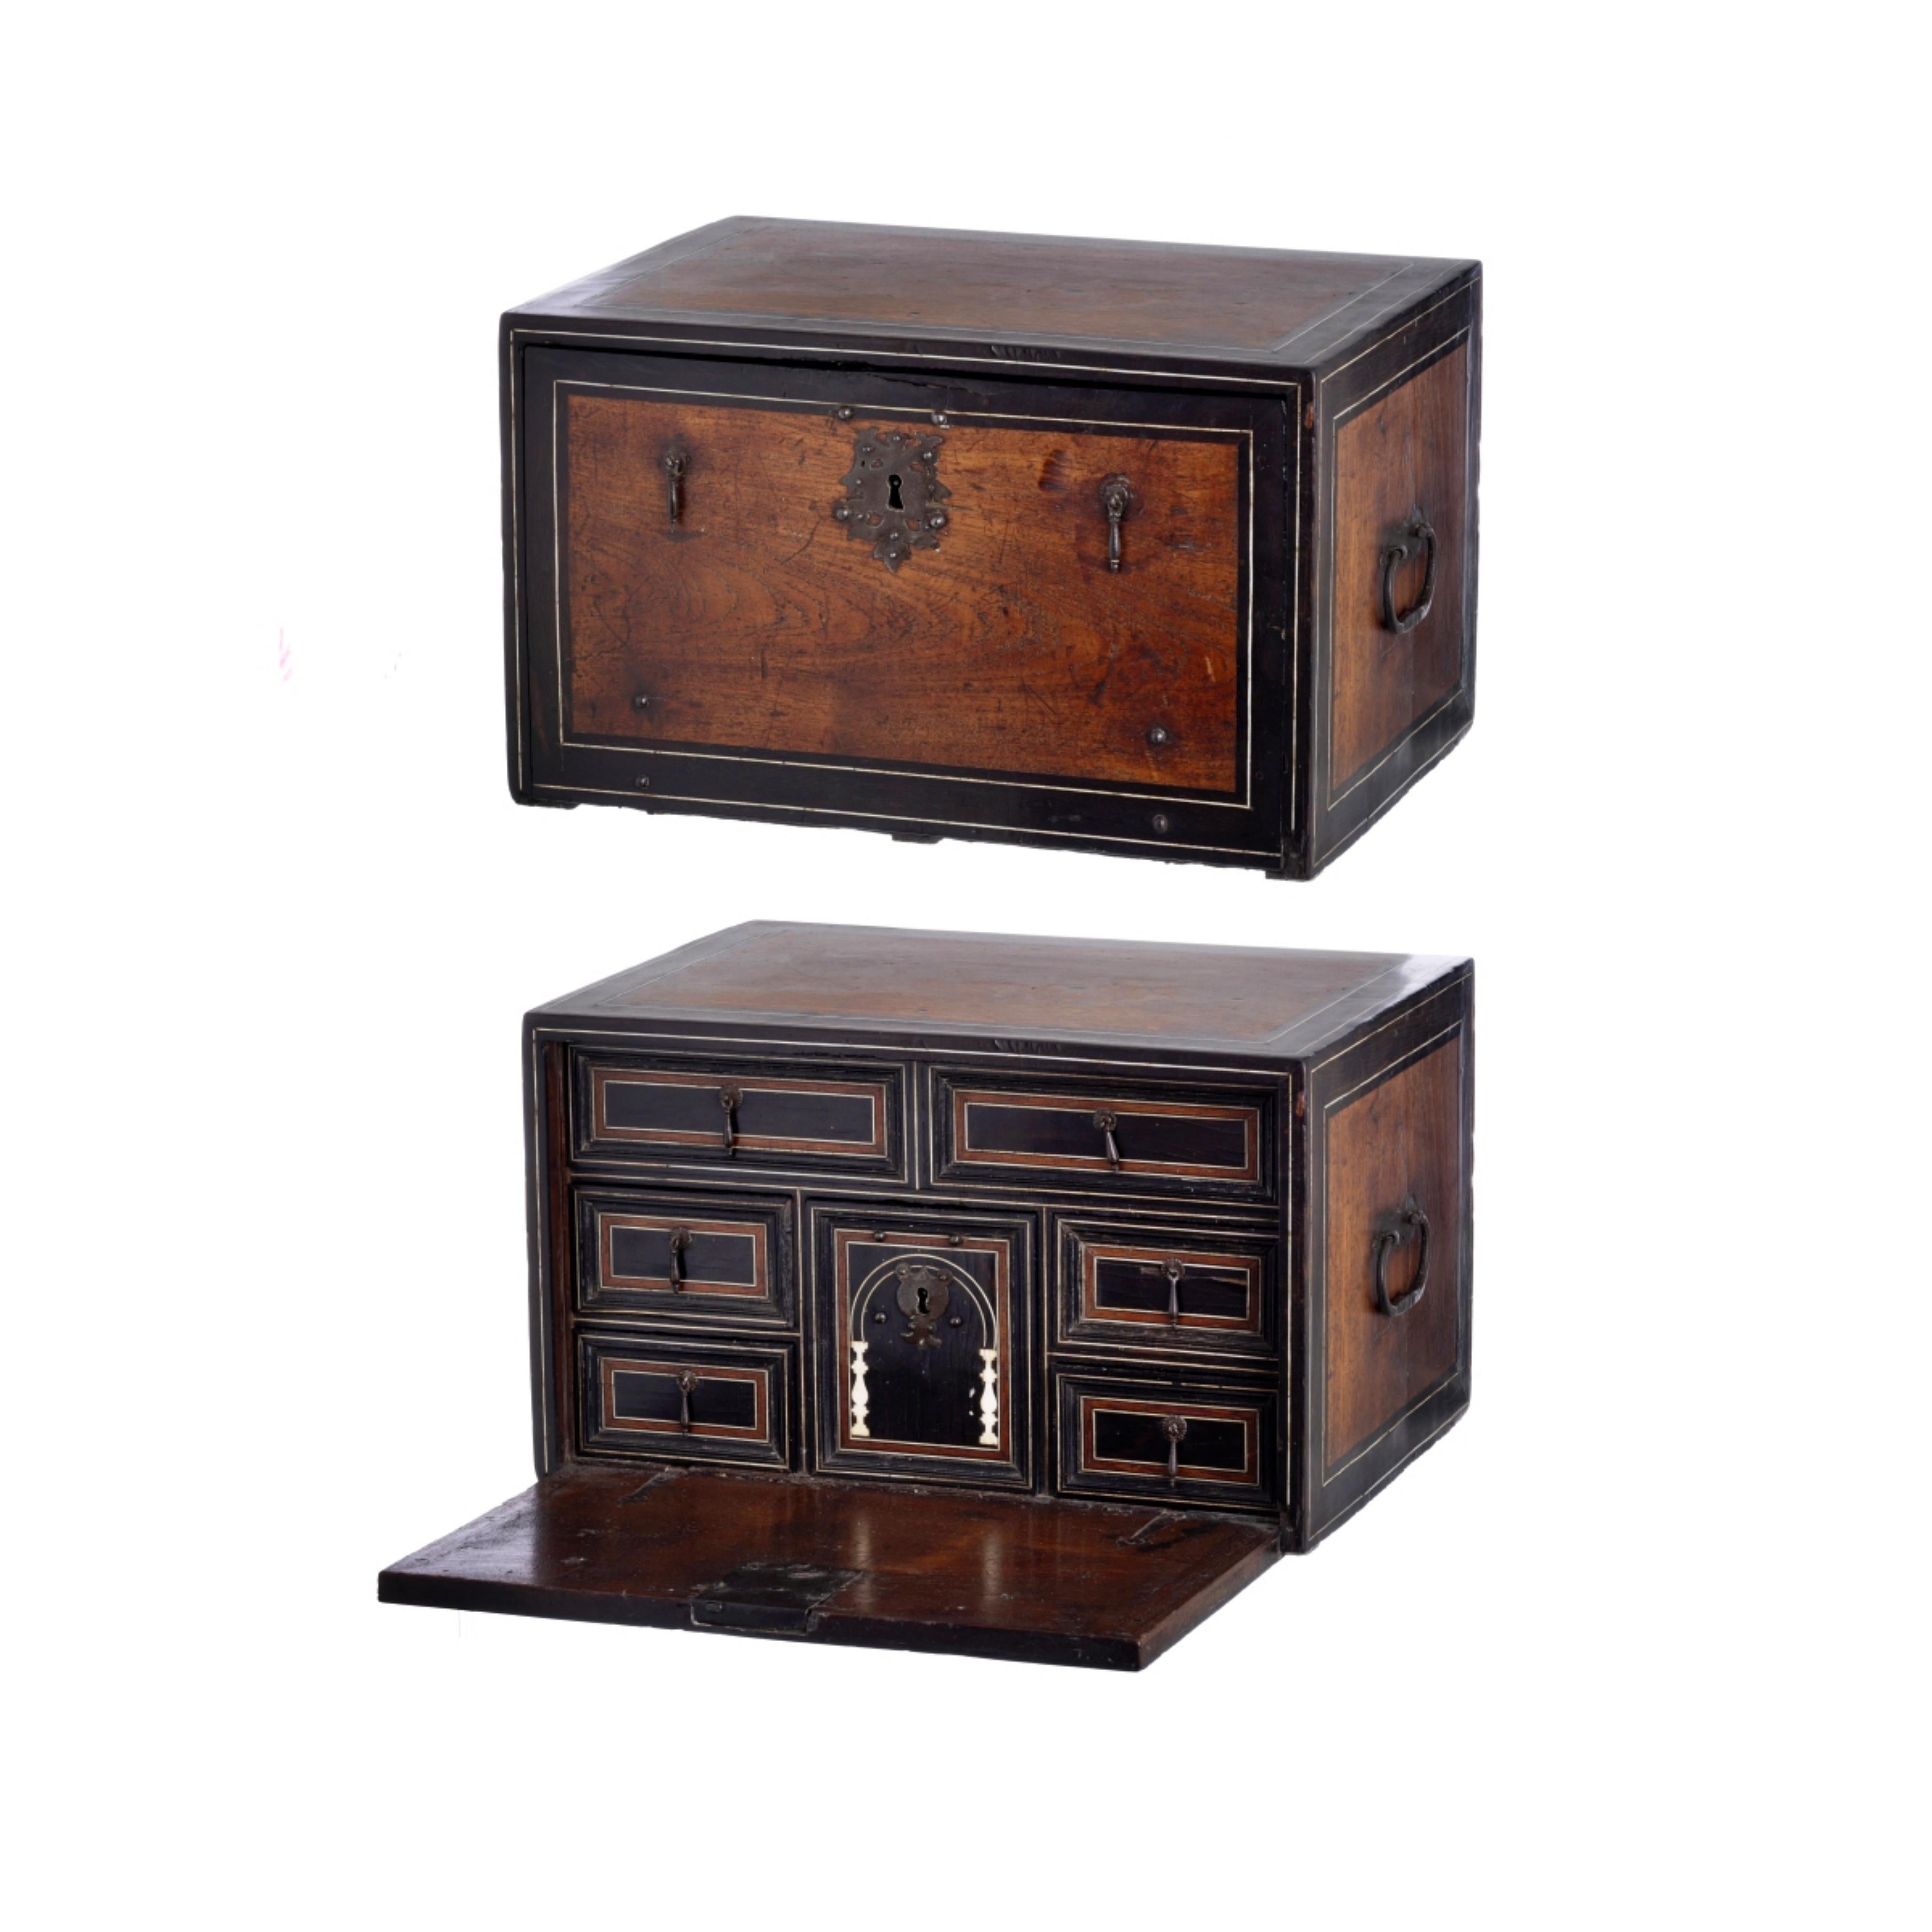 COUNTER CASH

Indo-Portuguese from the 17th century 
in ebony rosewood and ivory. 
Top, sides and front decorated with ivory inlay. 
Folding top showing factory with six drawers and central hatch. 
Metal hardware and wings. 
Small defects. Dim.: 24